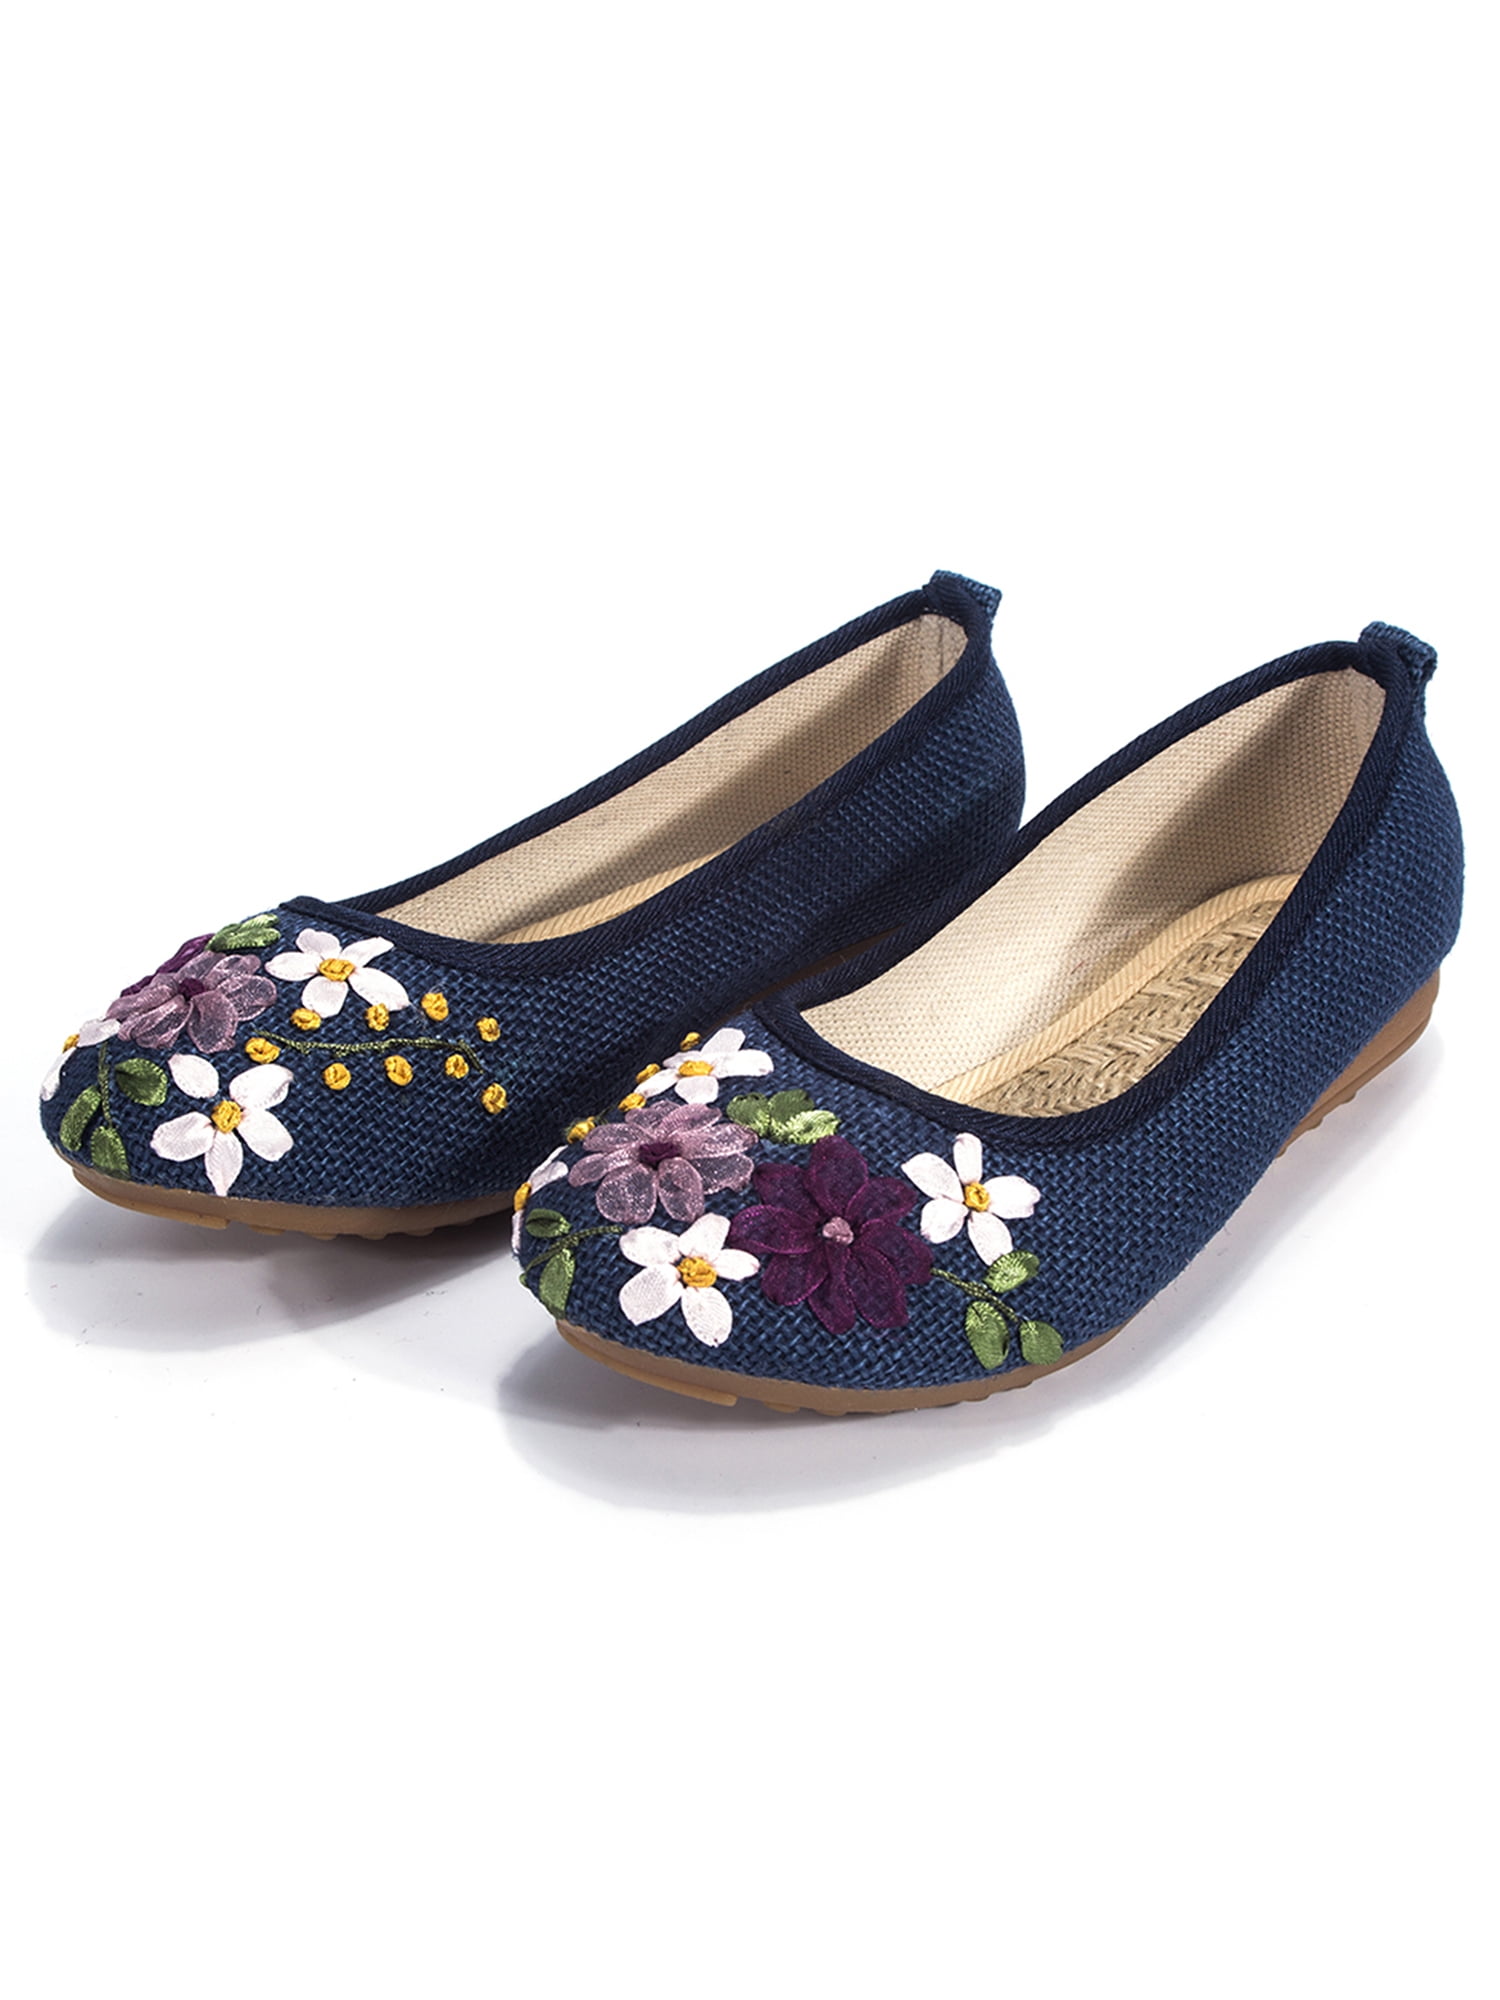 Embroidery Chinese Women Slip On Loafers Cotton Linen Nurse Square Dance Shoes 